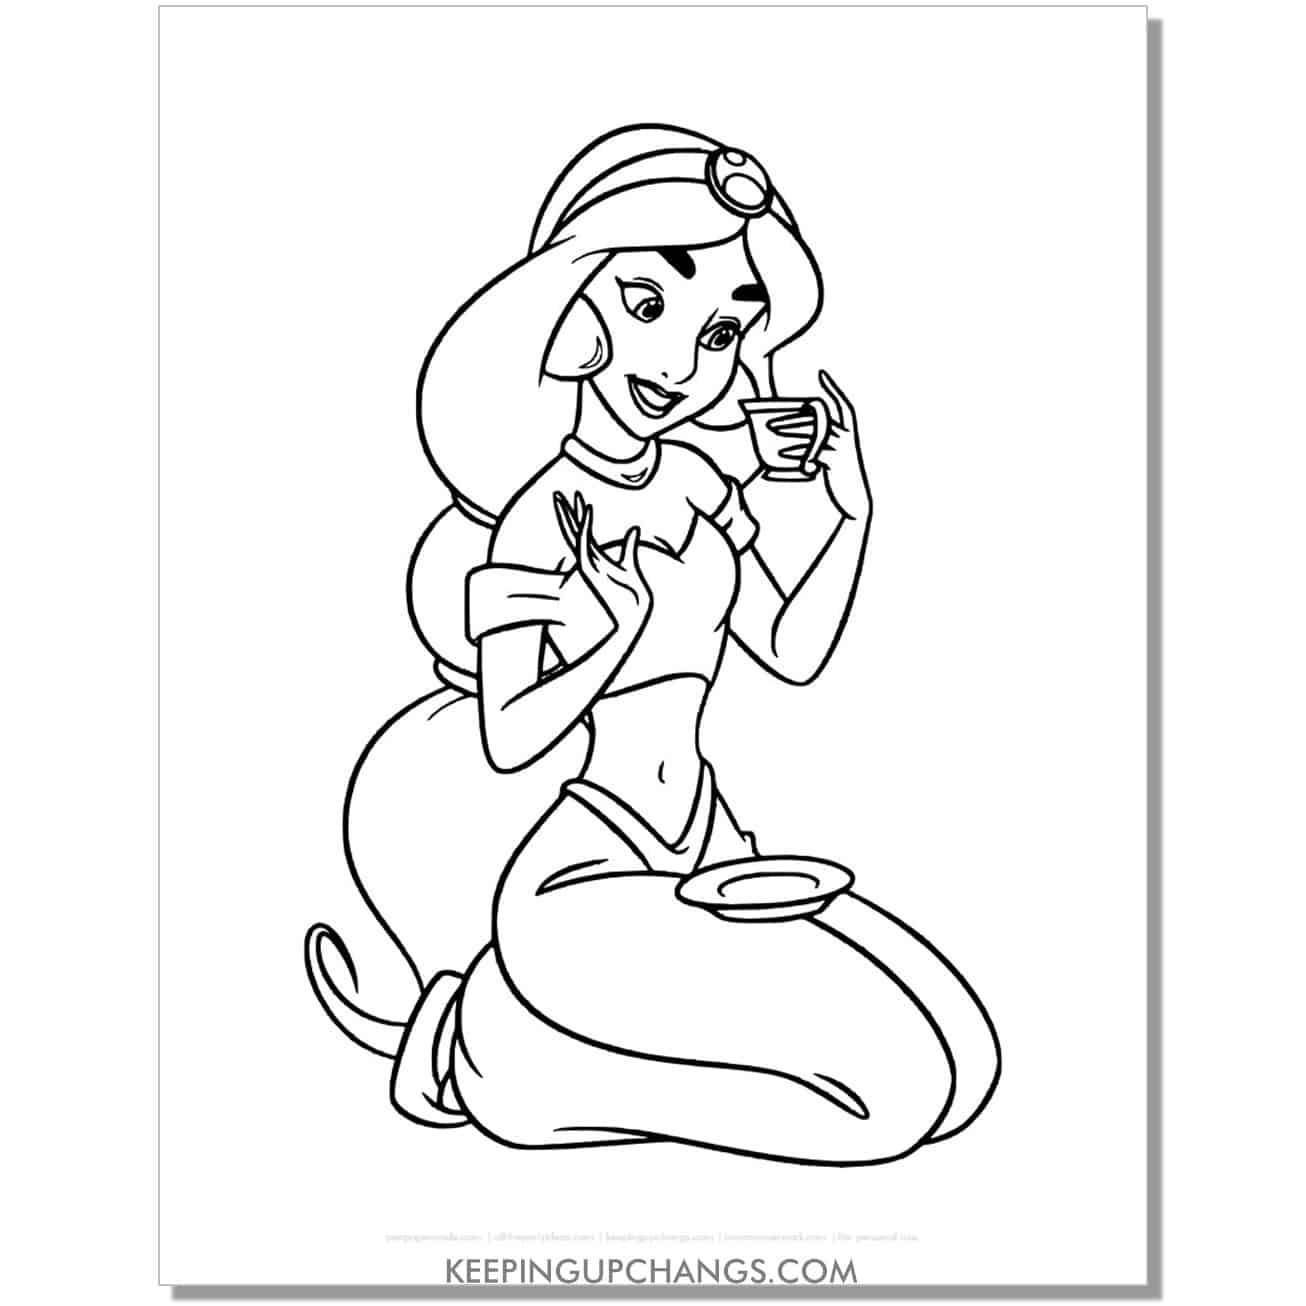 jasmine drinking cup of tea coloring page, sheet.